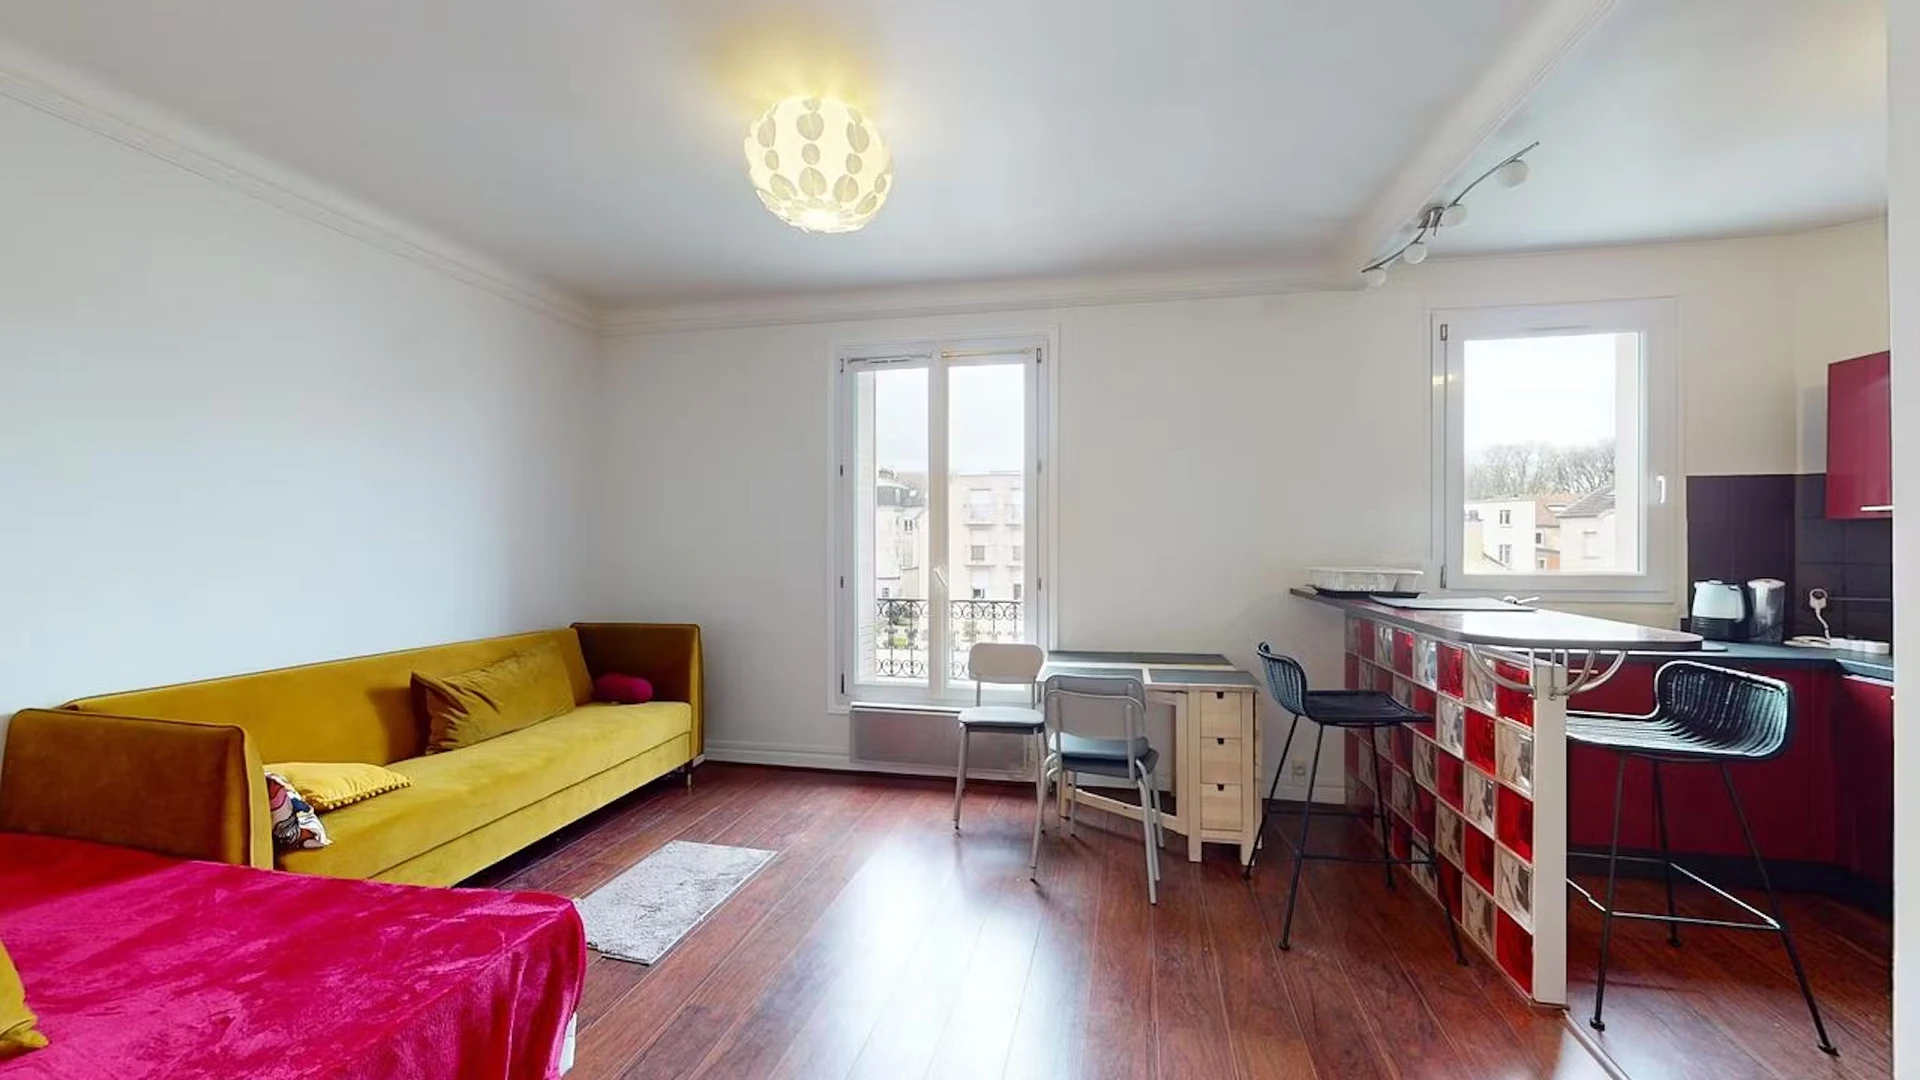 Accommodation in the centre of Reims